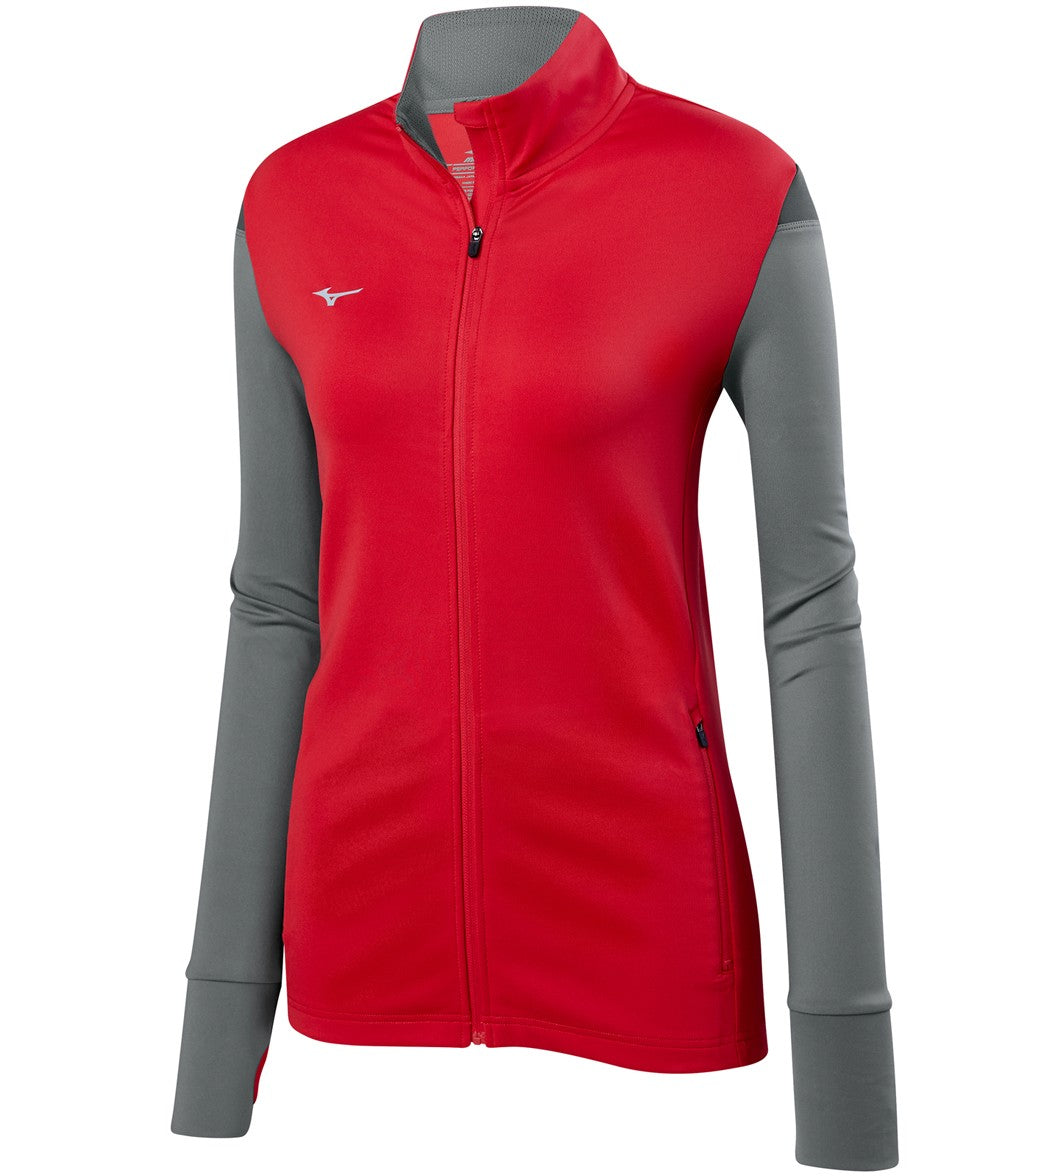 Mizuno Girls' Horizon Full Zip Volleyball Jacket - Red/Silver/Charcoal Large Cotton/Polyester - Swimoutlet.com